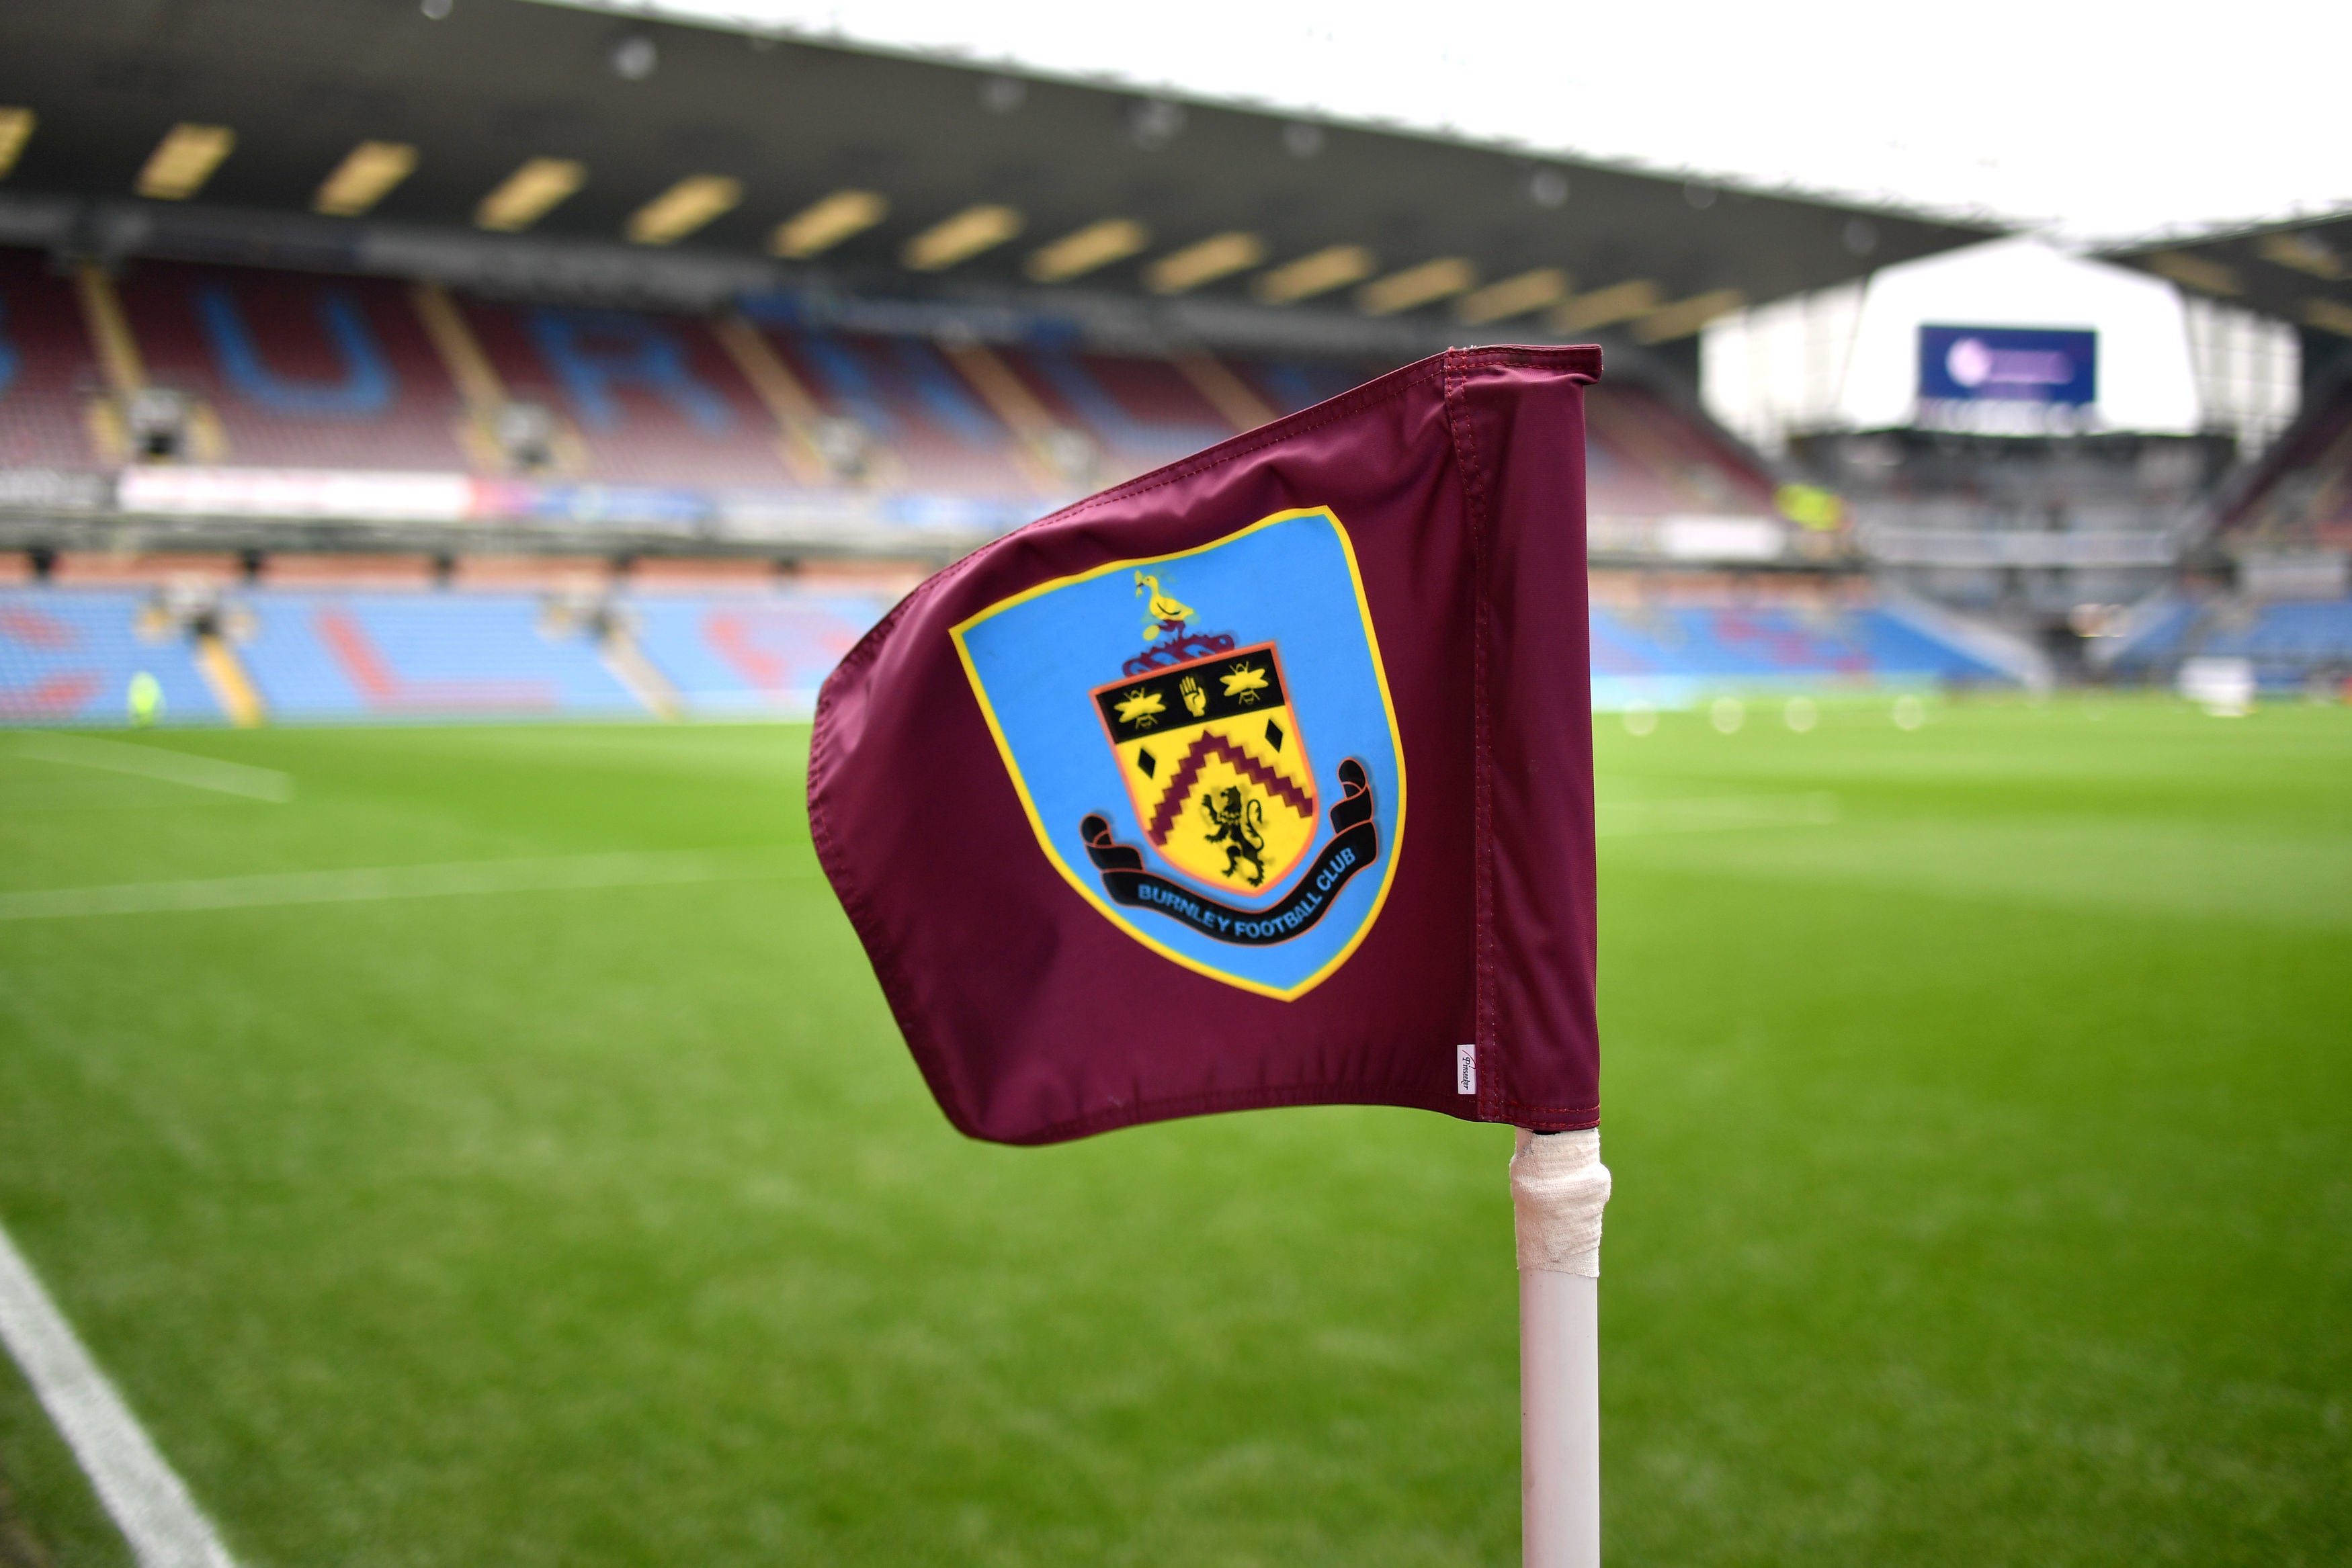 Burnley’s match with Fulham will be rearranged